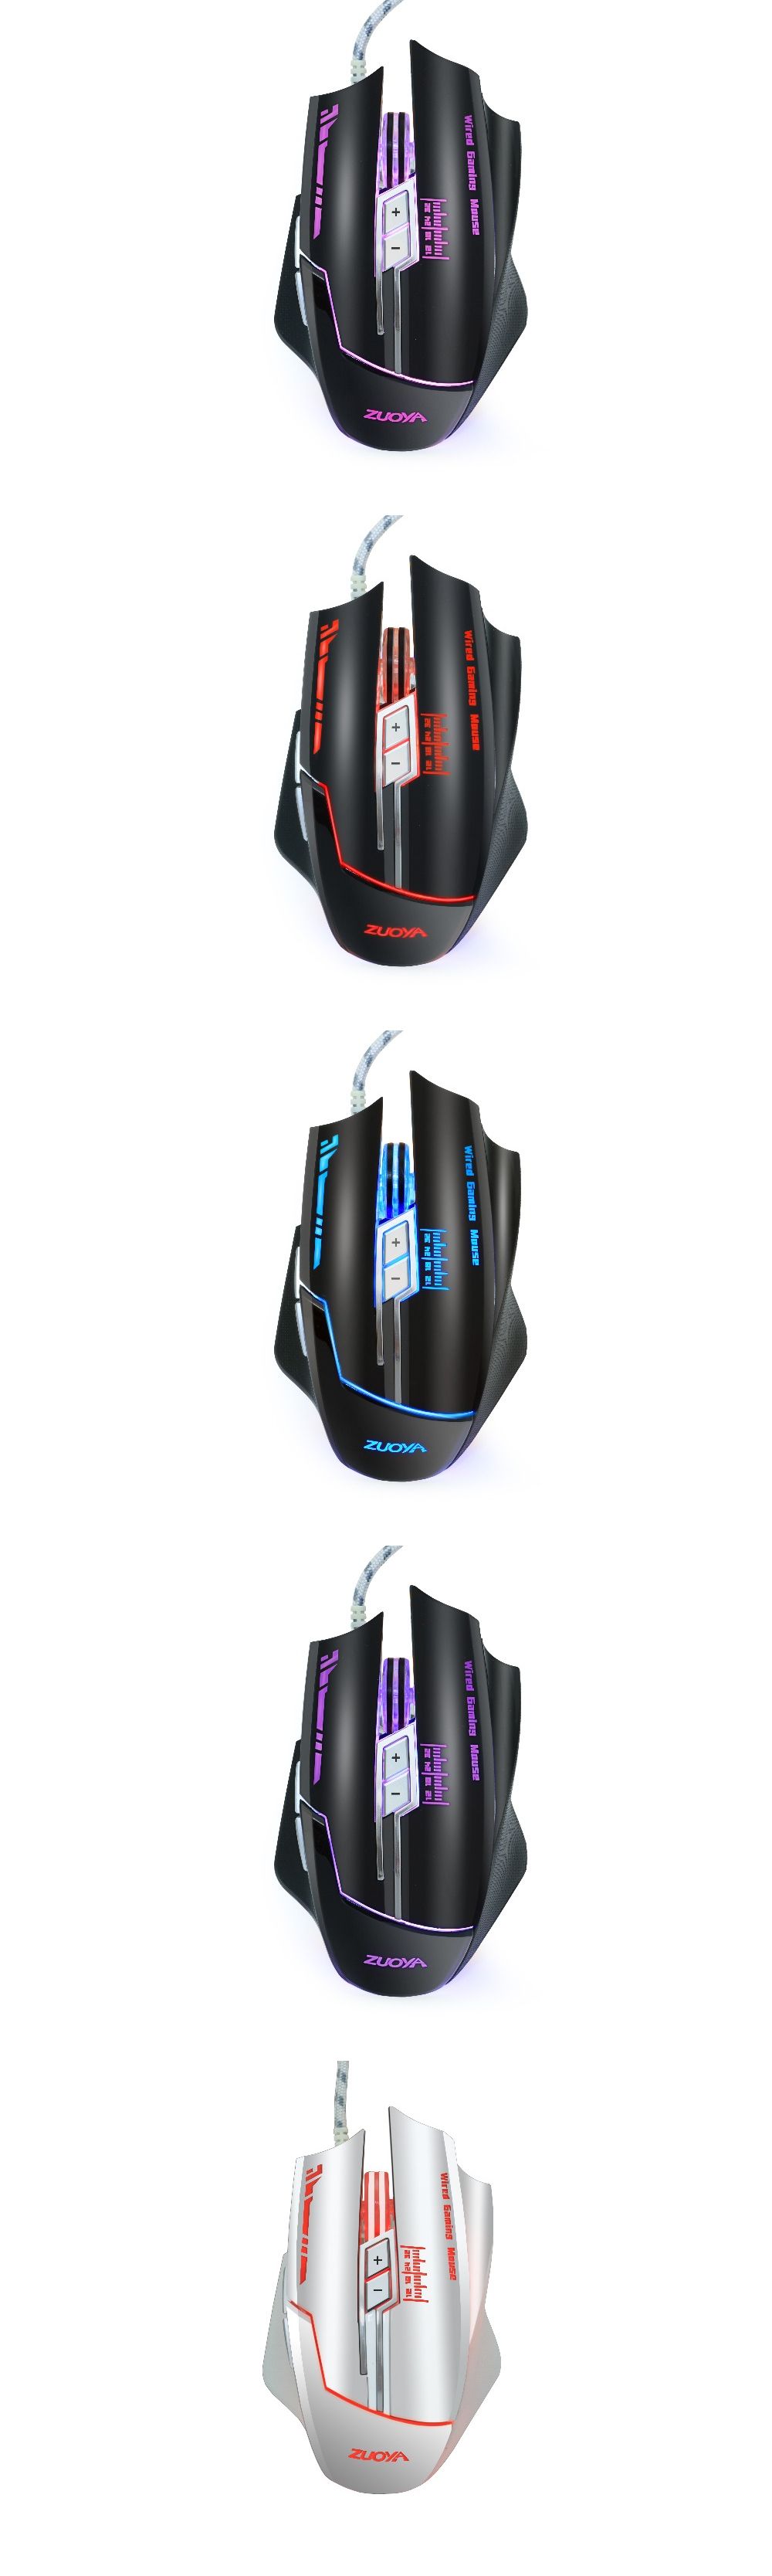 ZUOYA-MMR7-Wired-Gaming-Mouse-USB-LED-Desktop-Gaming-Computer-Optical-Gamer-Mice-Macro-Mouse-For-Lap-1614322